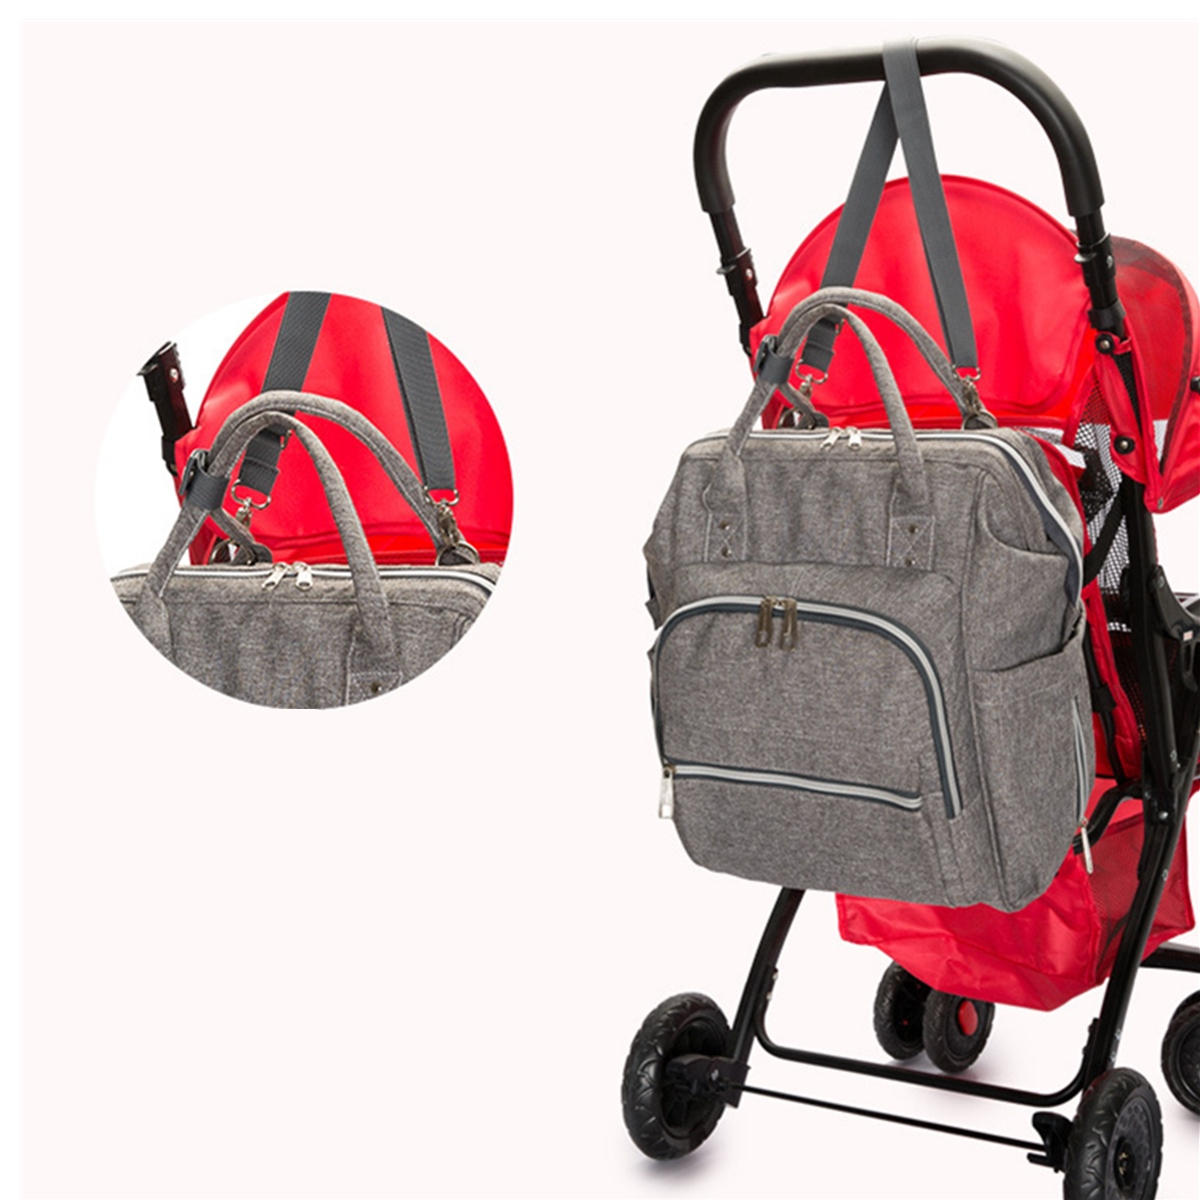 25L Outdoor Travel Mummy Baby Diaper Nappy Backpack Multi-functional Changing Bag + Water Bottle Bag